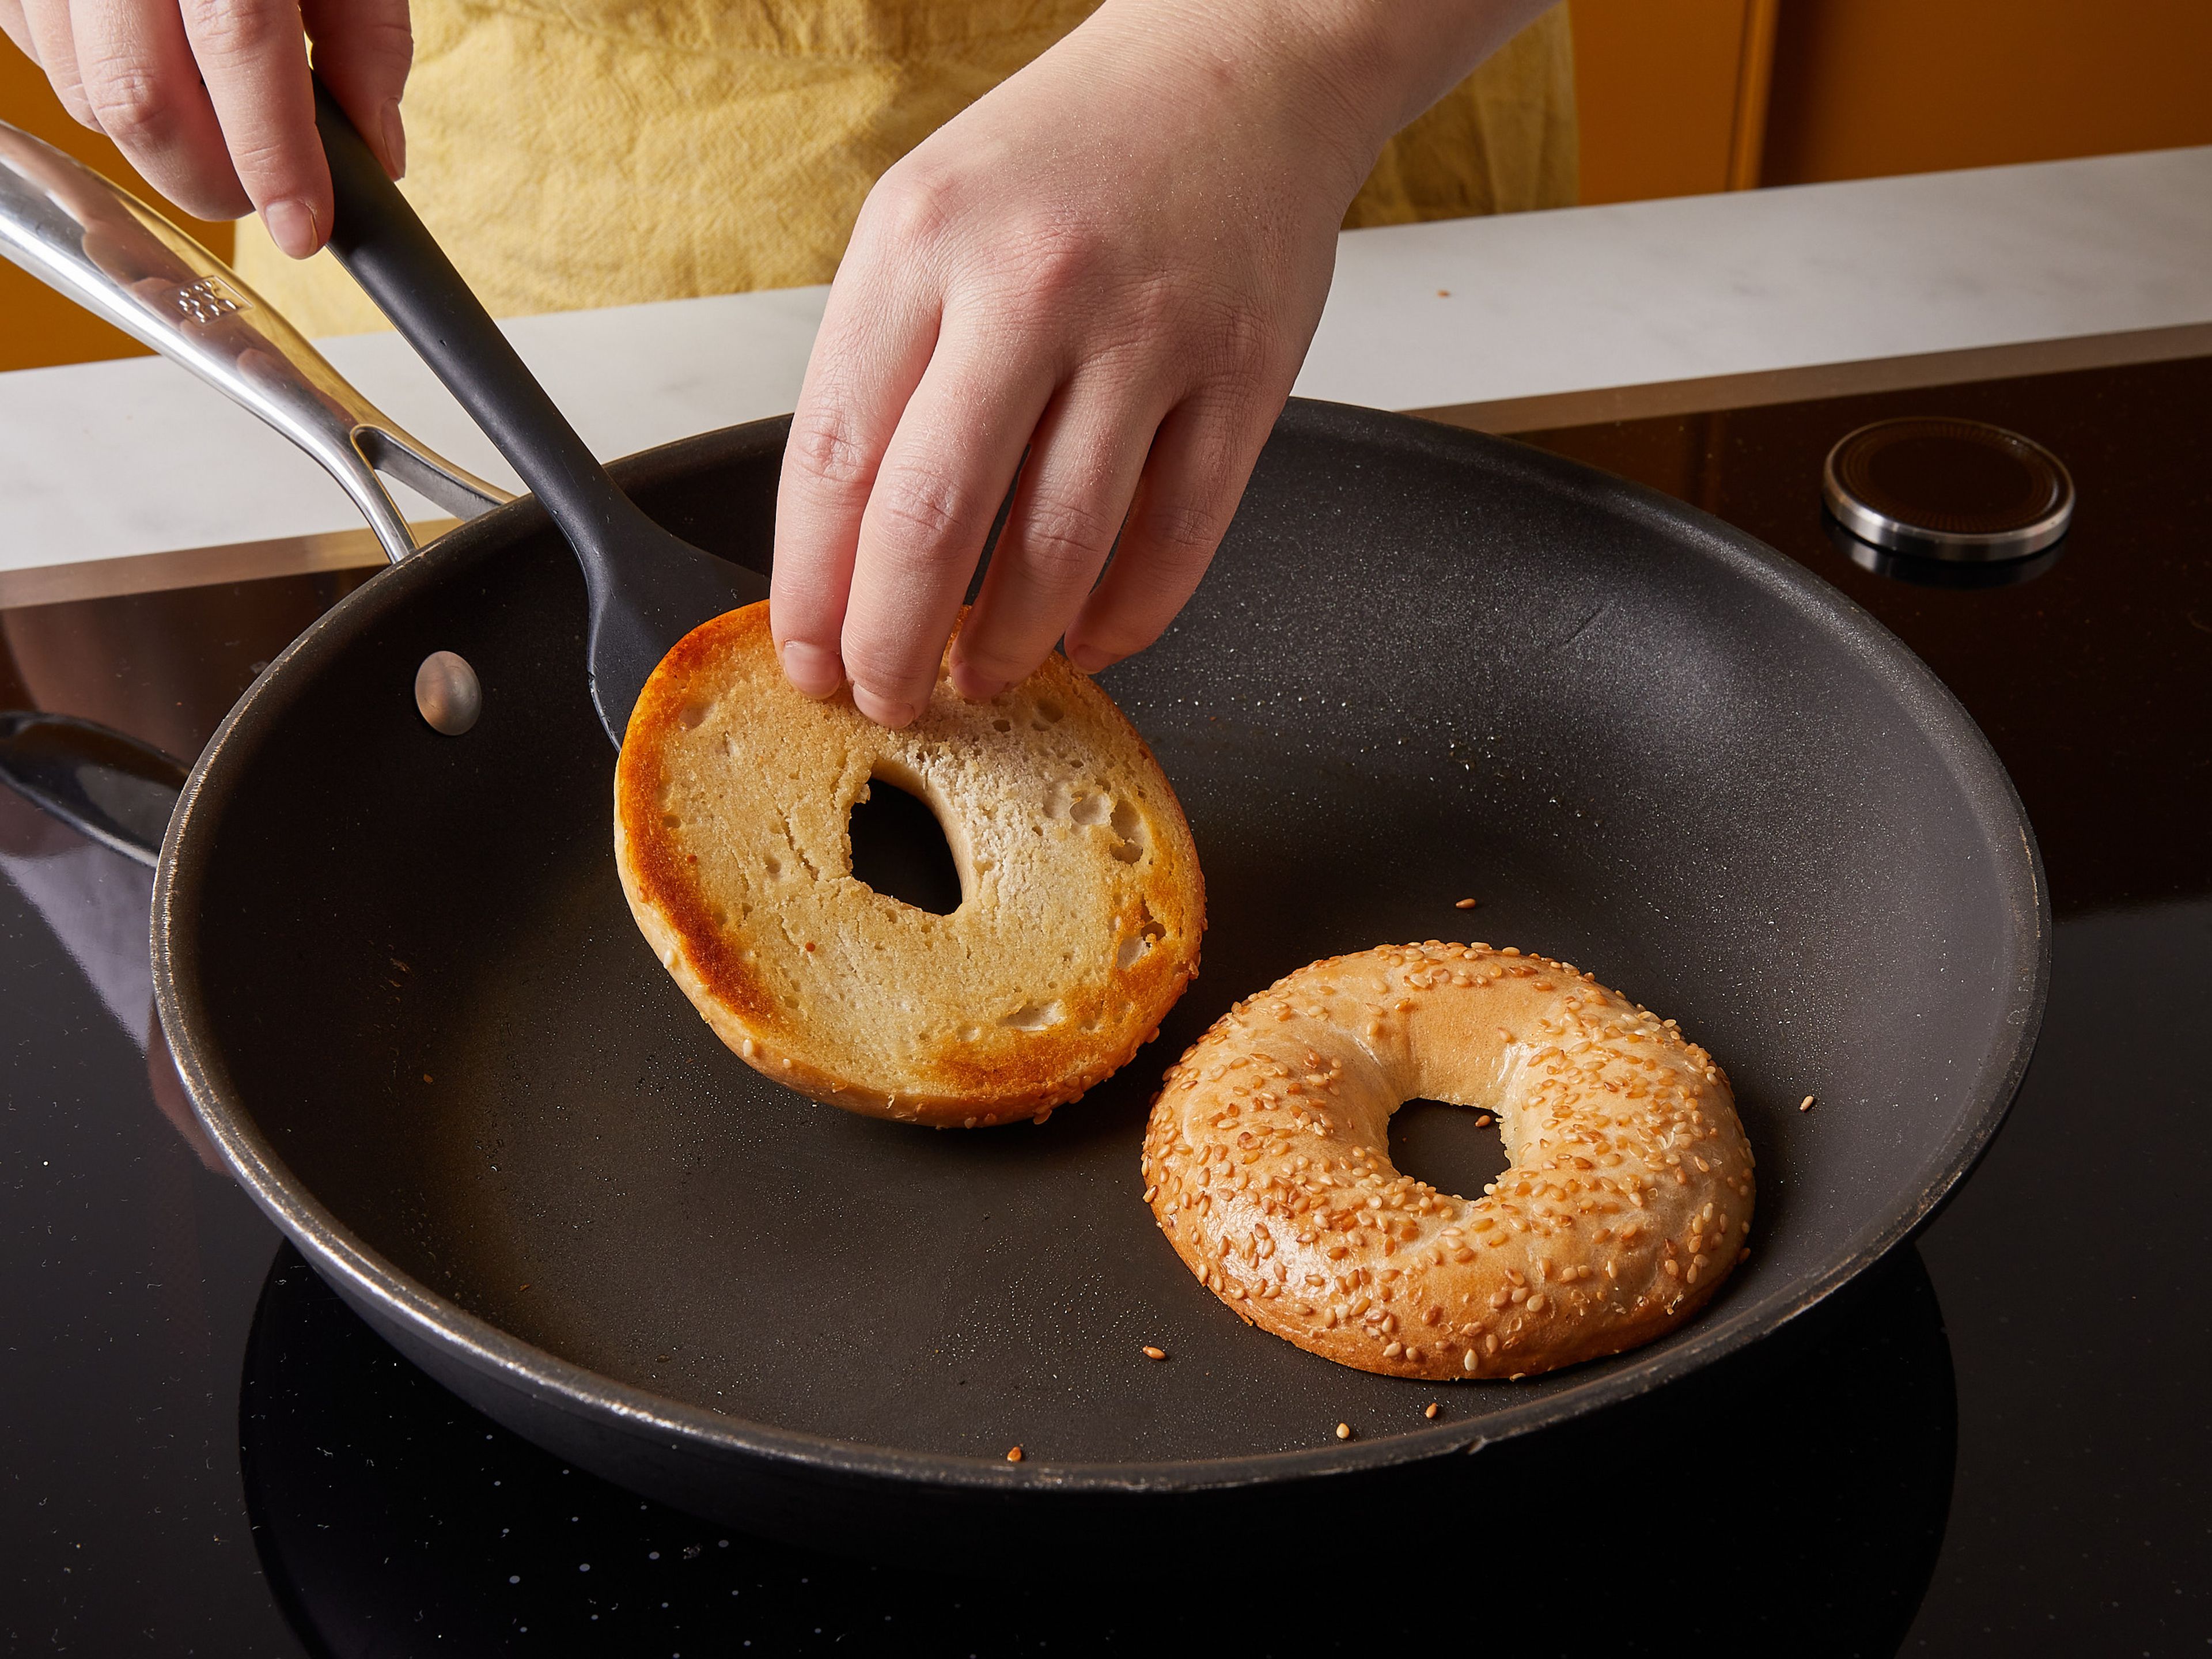 In a small nonstick frying pan, heat half the butter over medium-low heat, add bagel, cut-sides down, and toast briefly.